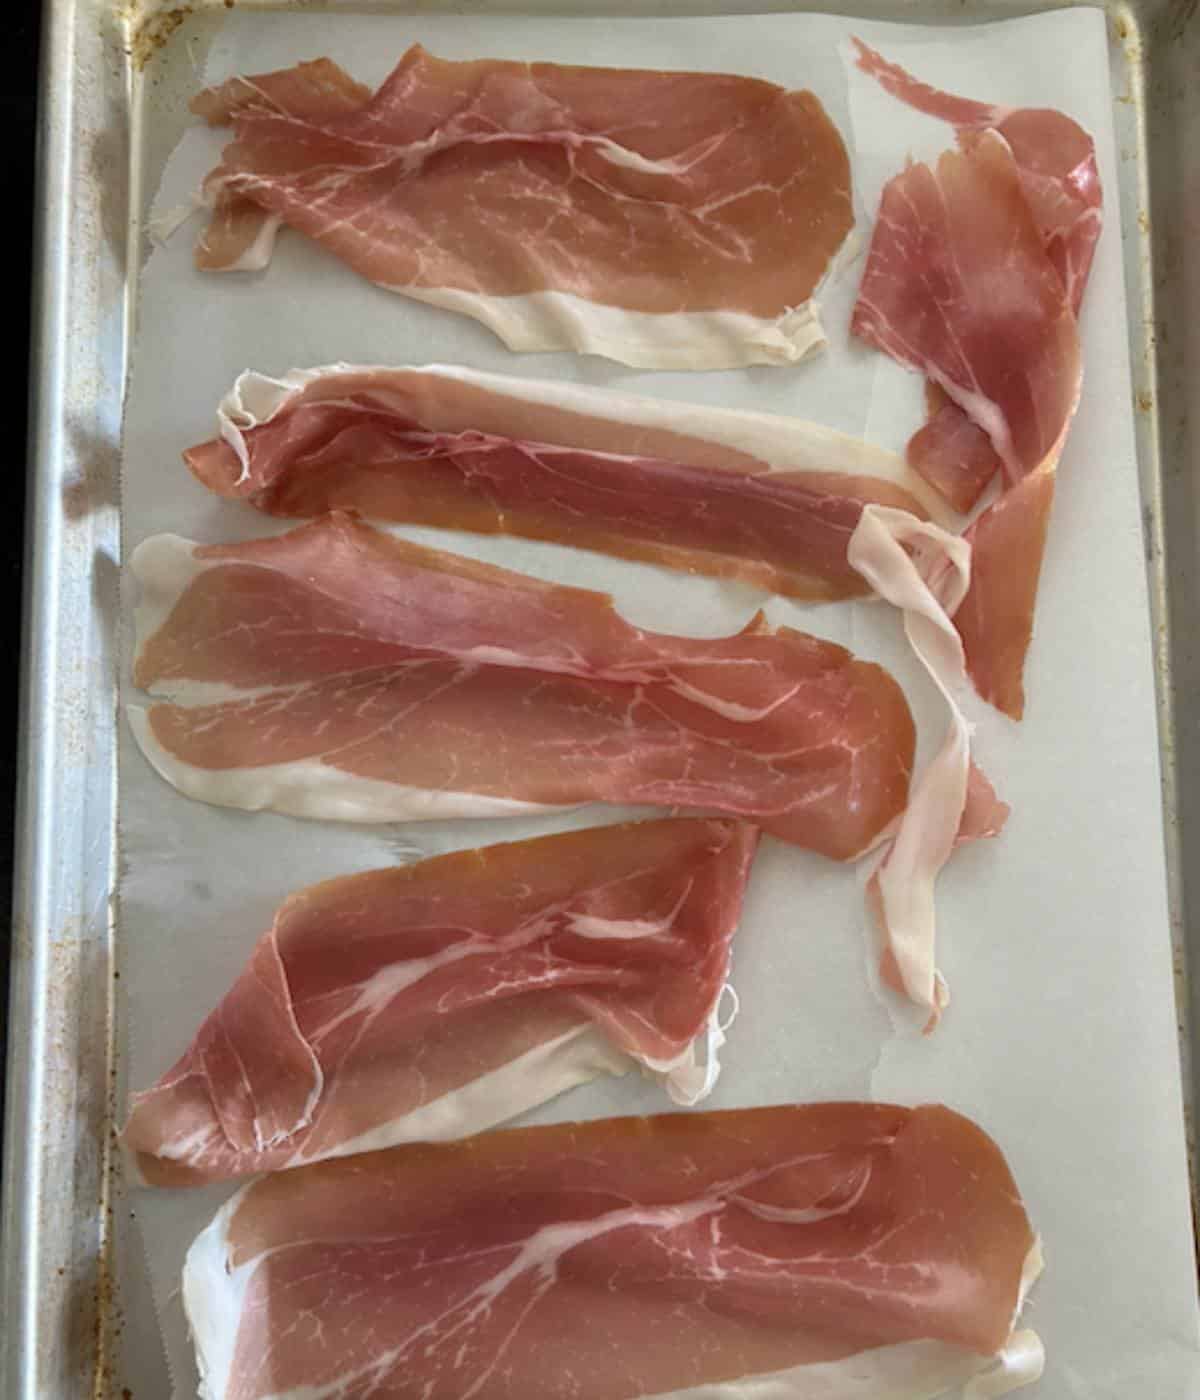 Prosciutto on cookie sheet.